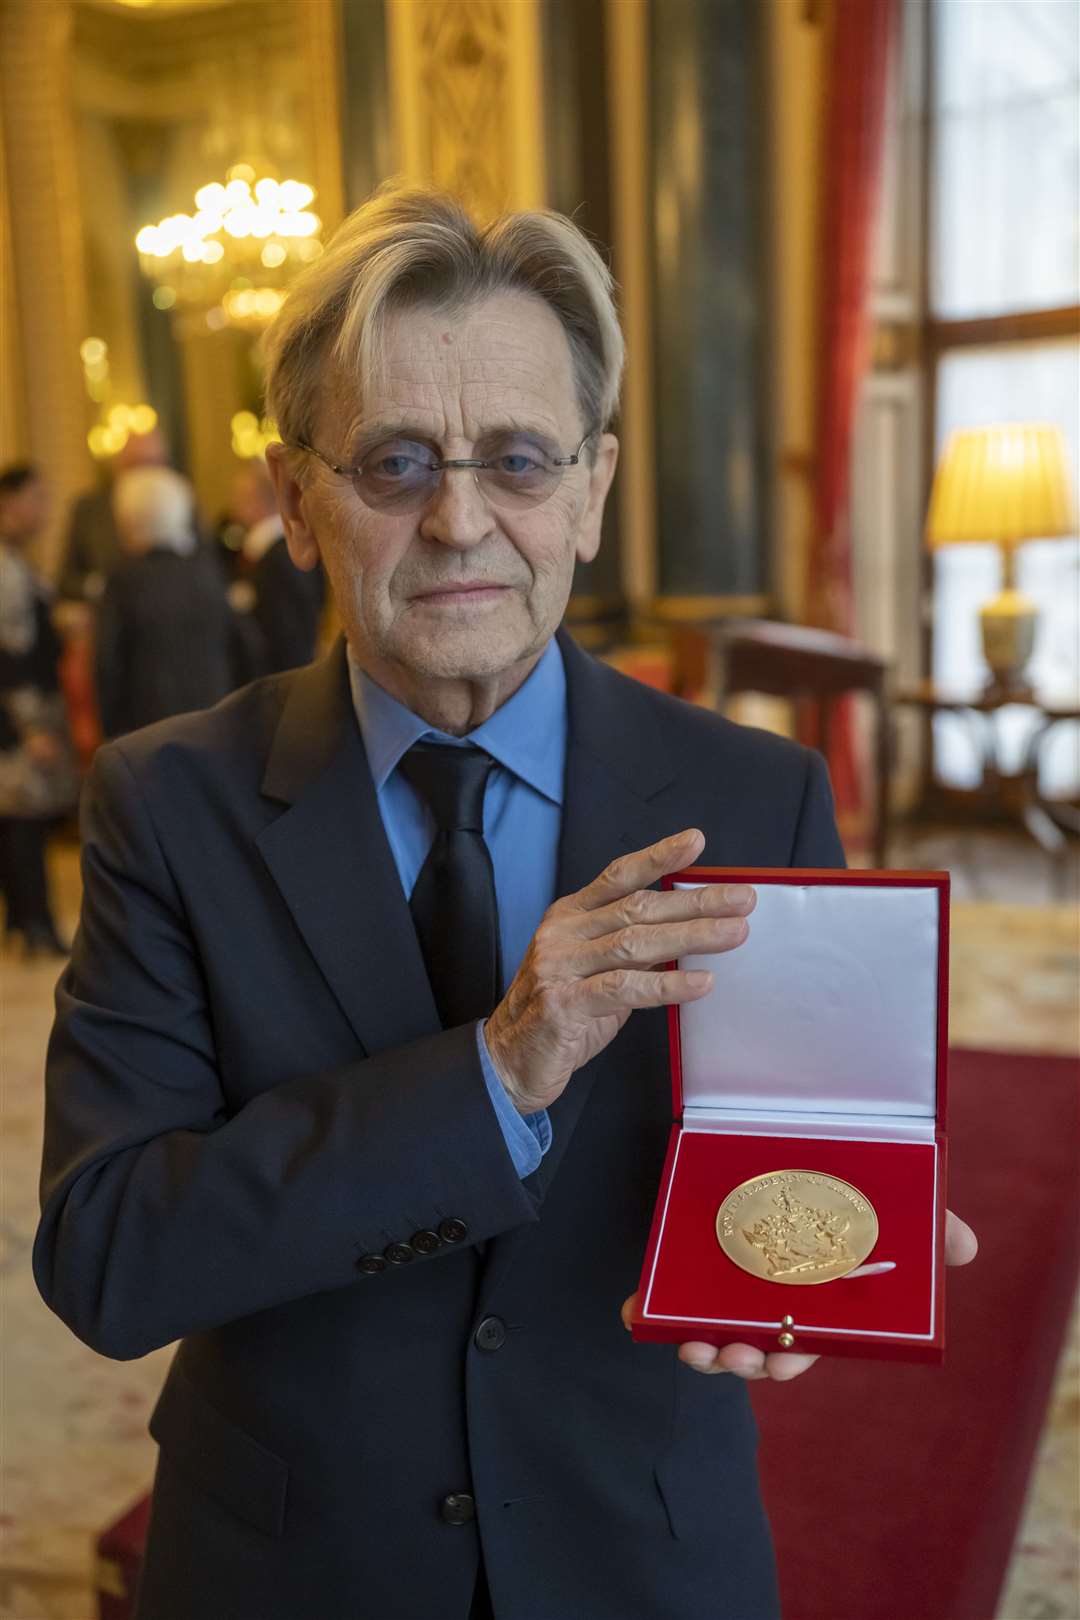 Mikhail Baryshnikov with the Royal Academy of Dance’s highest honour, the Queen Elizabeth II Coronation Award, in recognition of his contribution to ballet and the wider world of dance (Paul Grover/Daily Telegraph/PA)